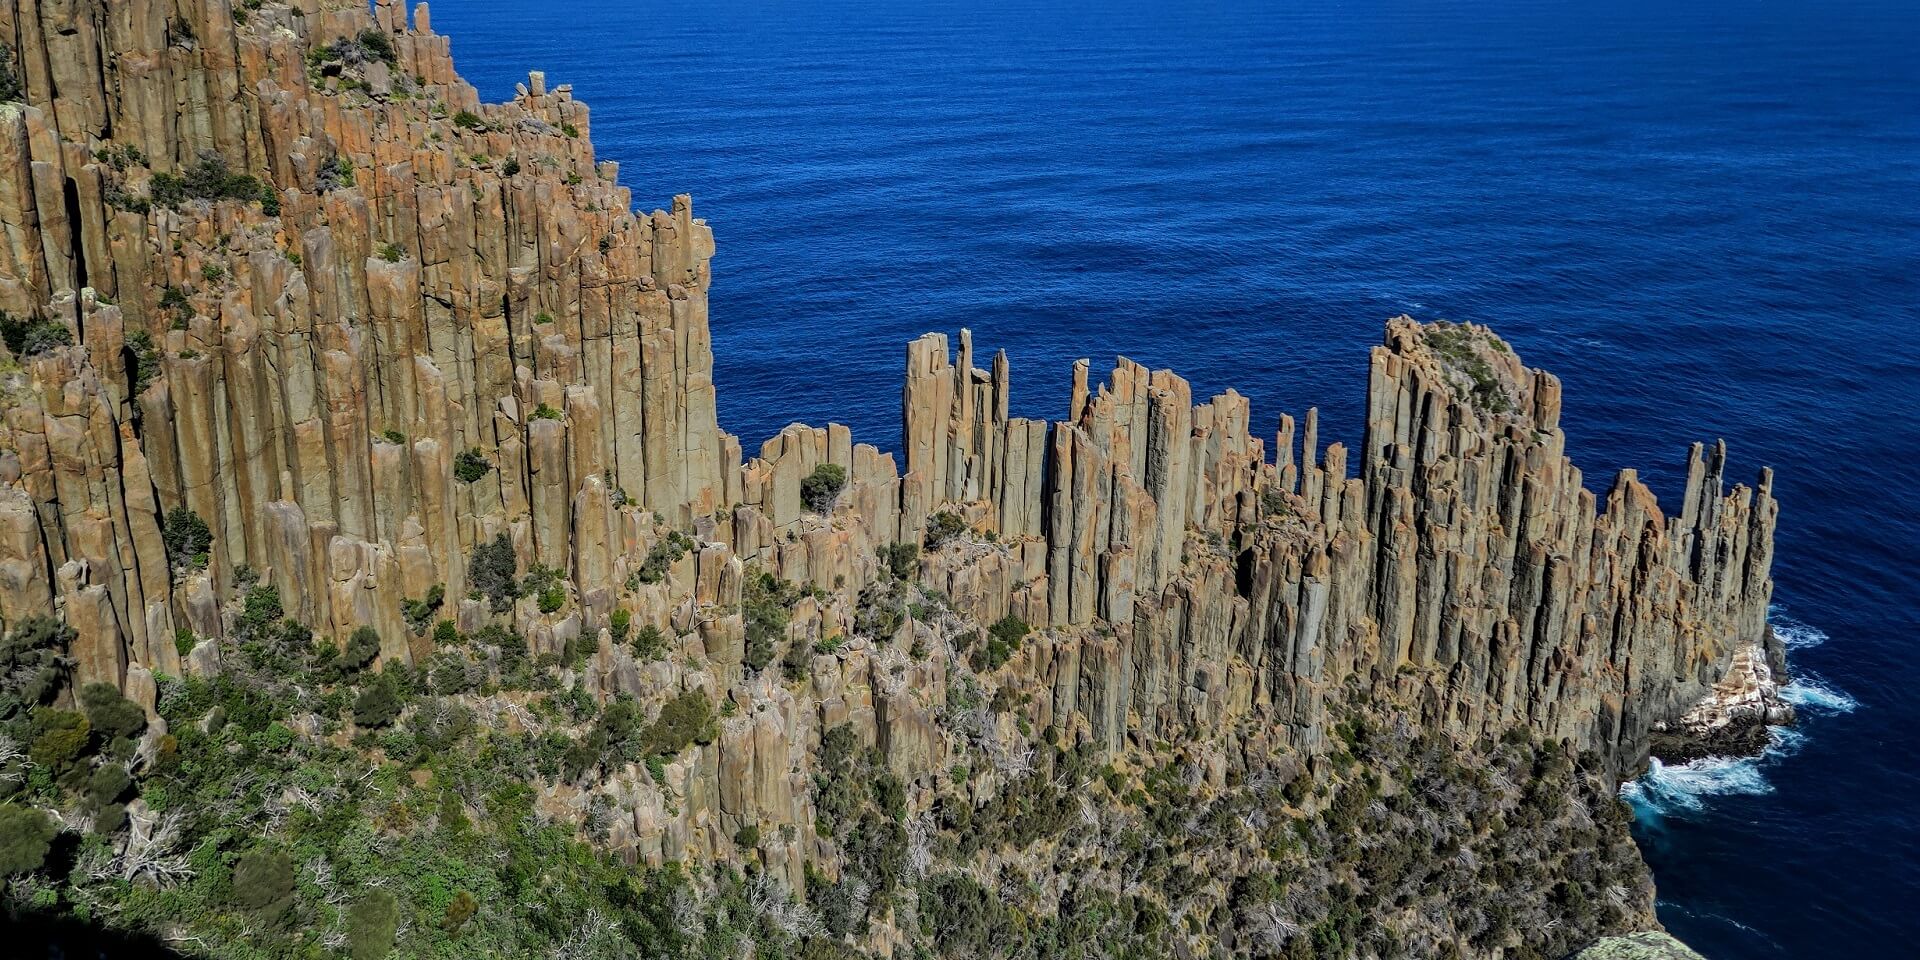 Footer Cape Raoul - one of the tallest sea cliffs in Australia